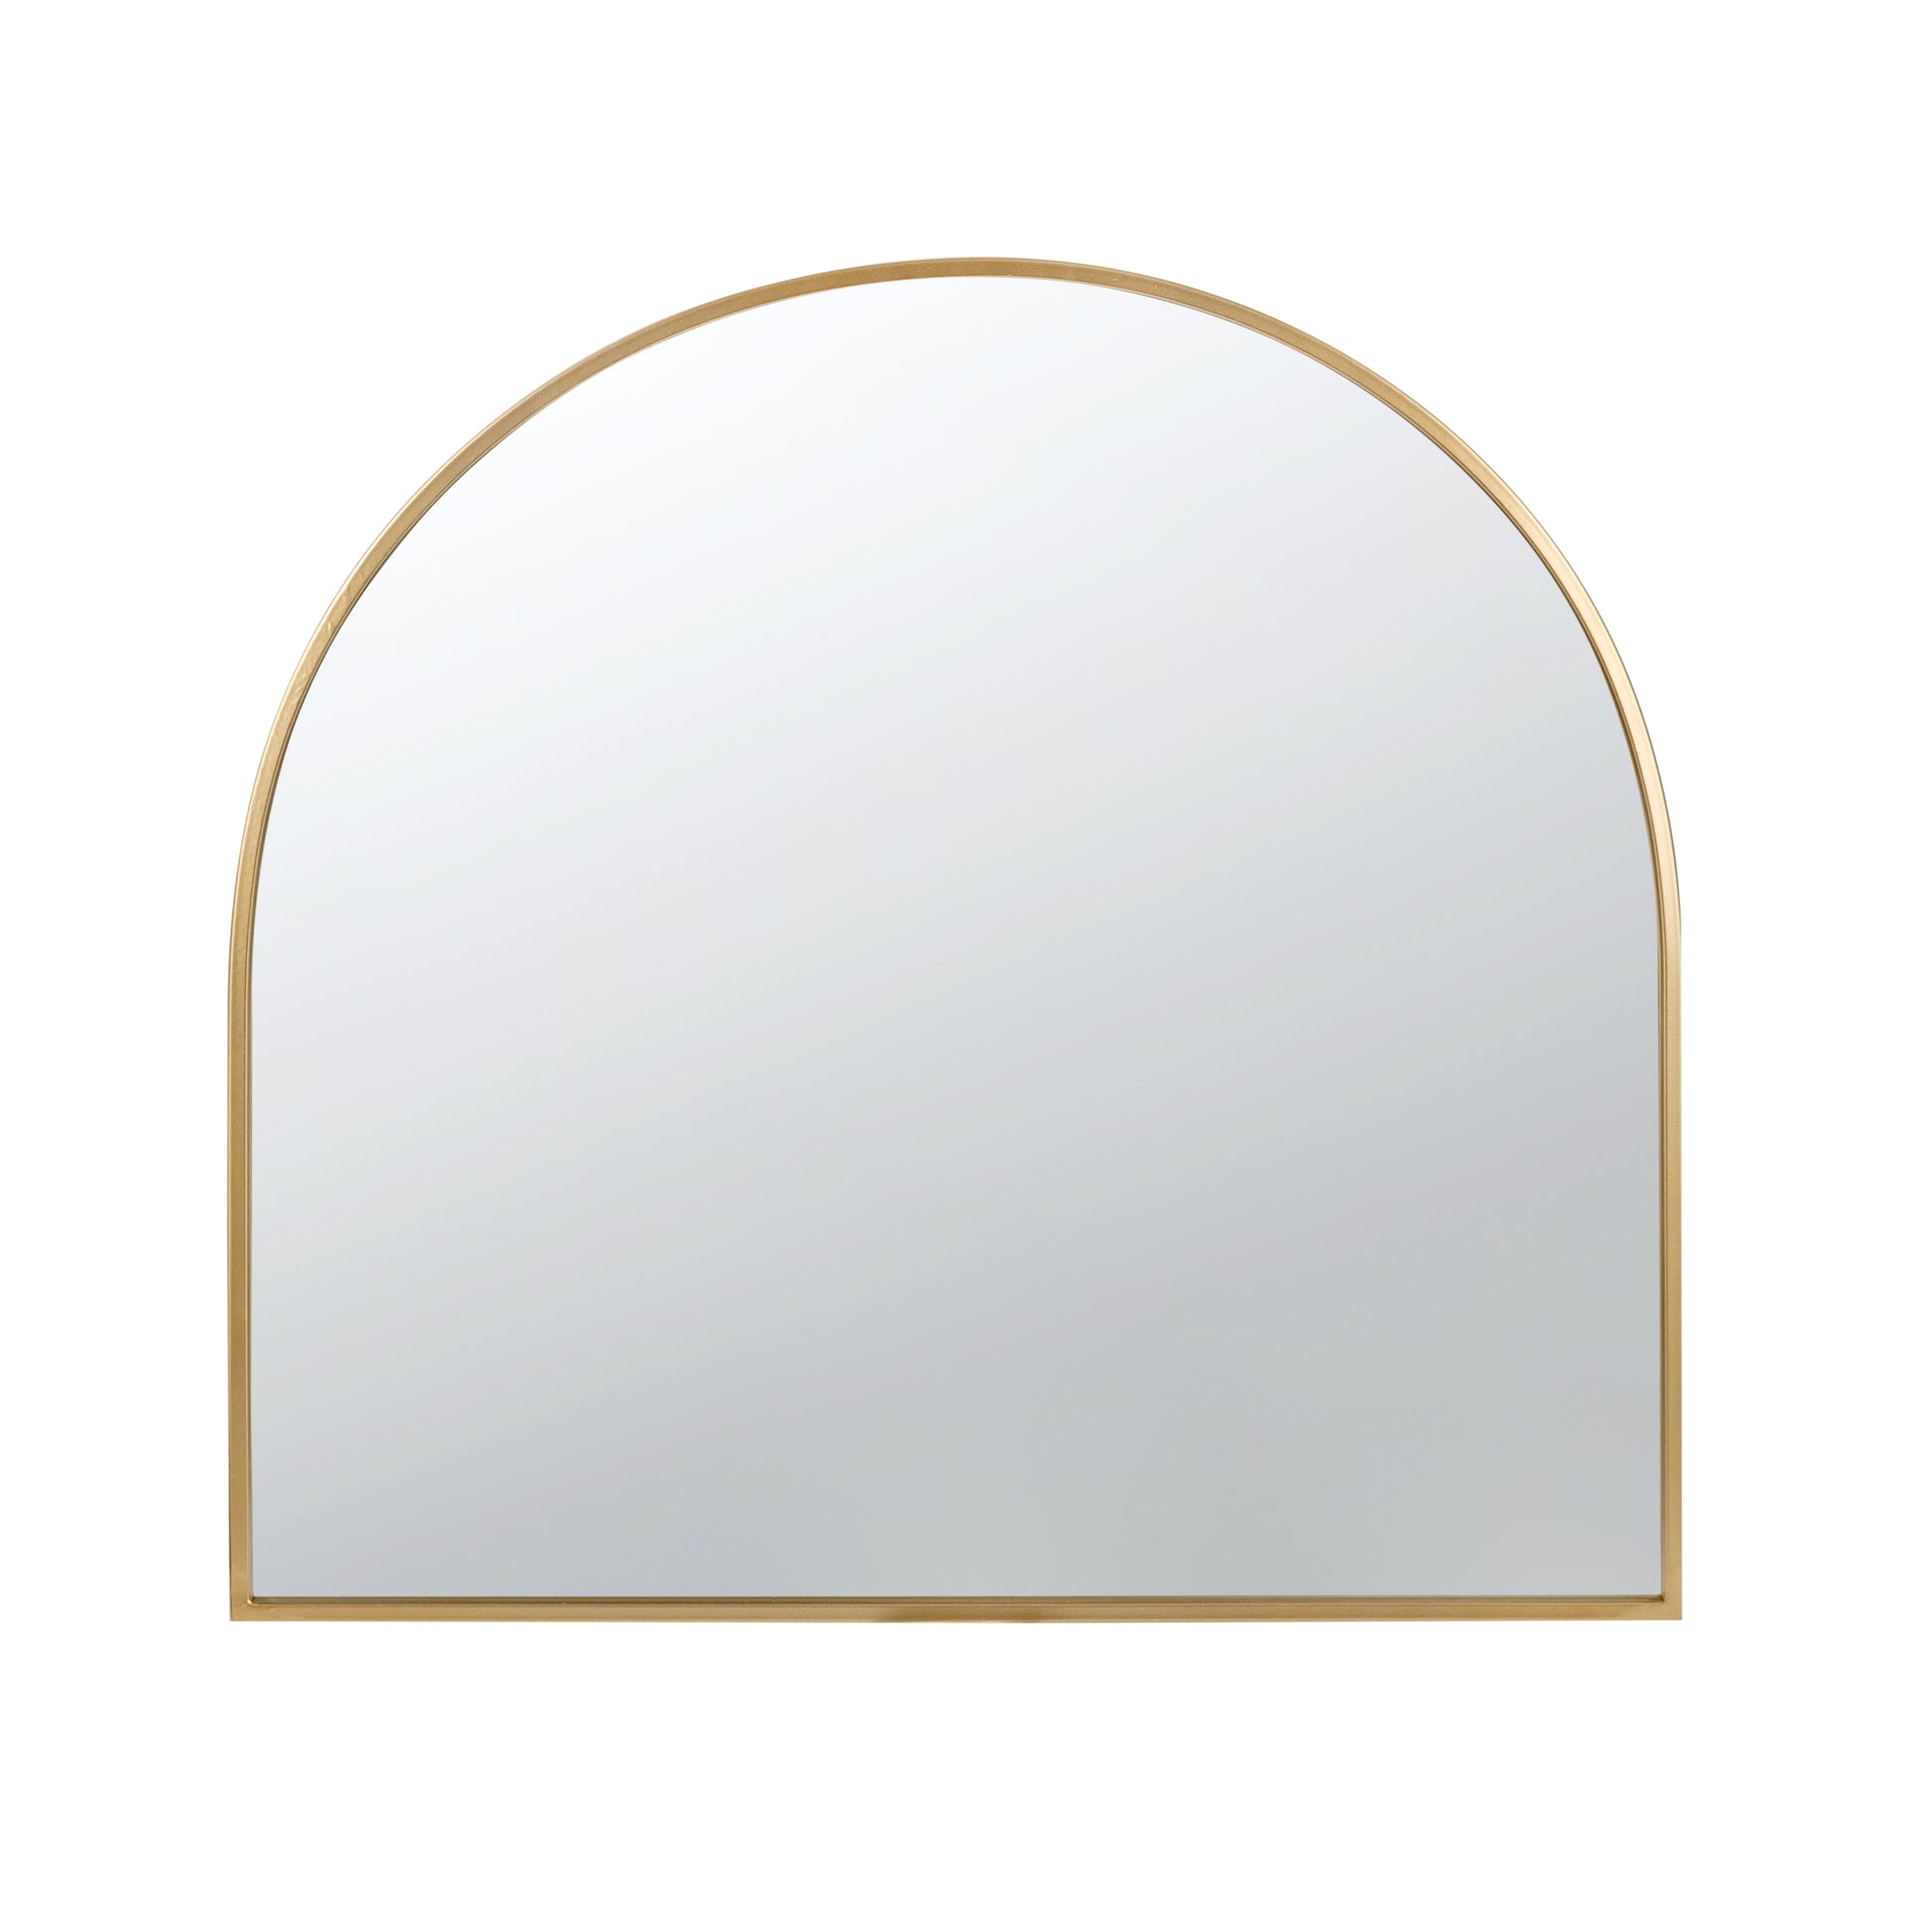 33" x 31" Arched Decorative Accent Mirror with